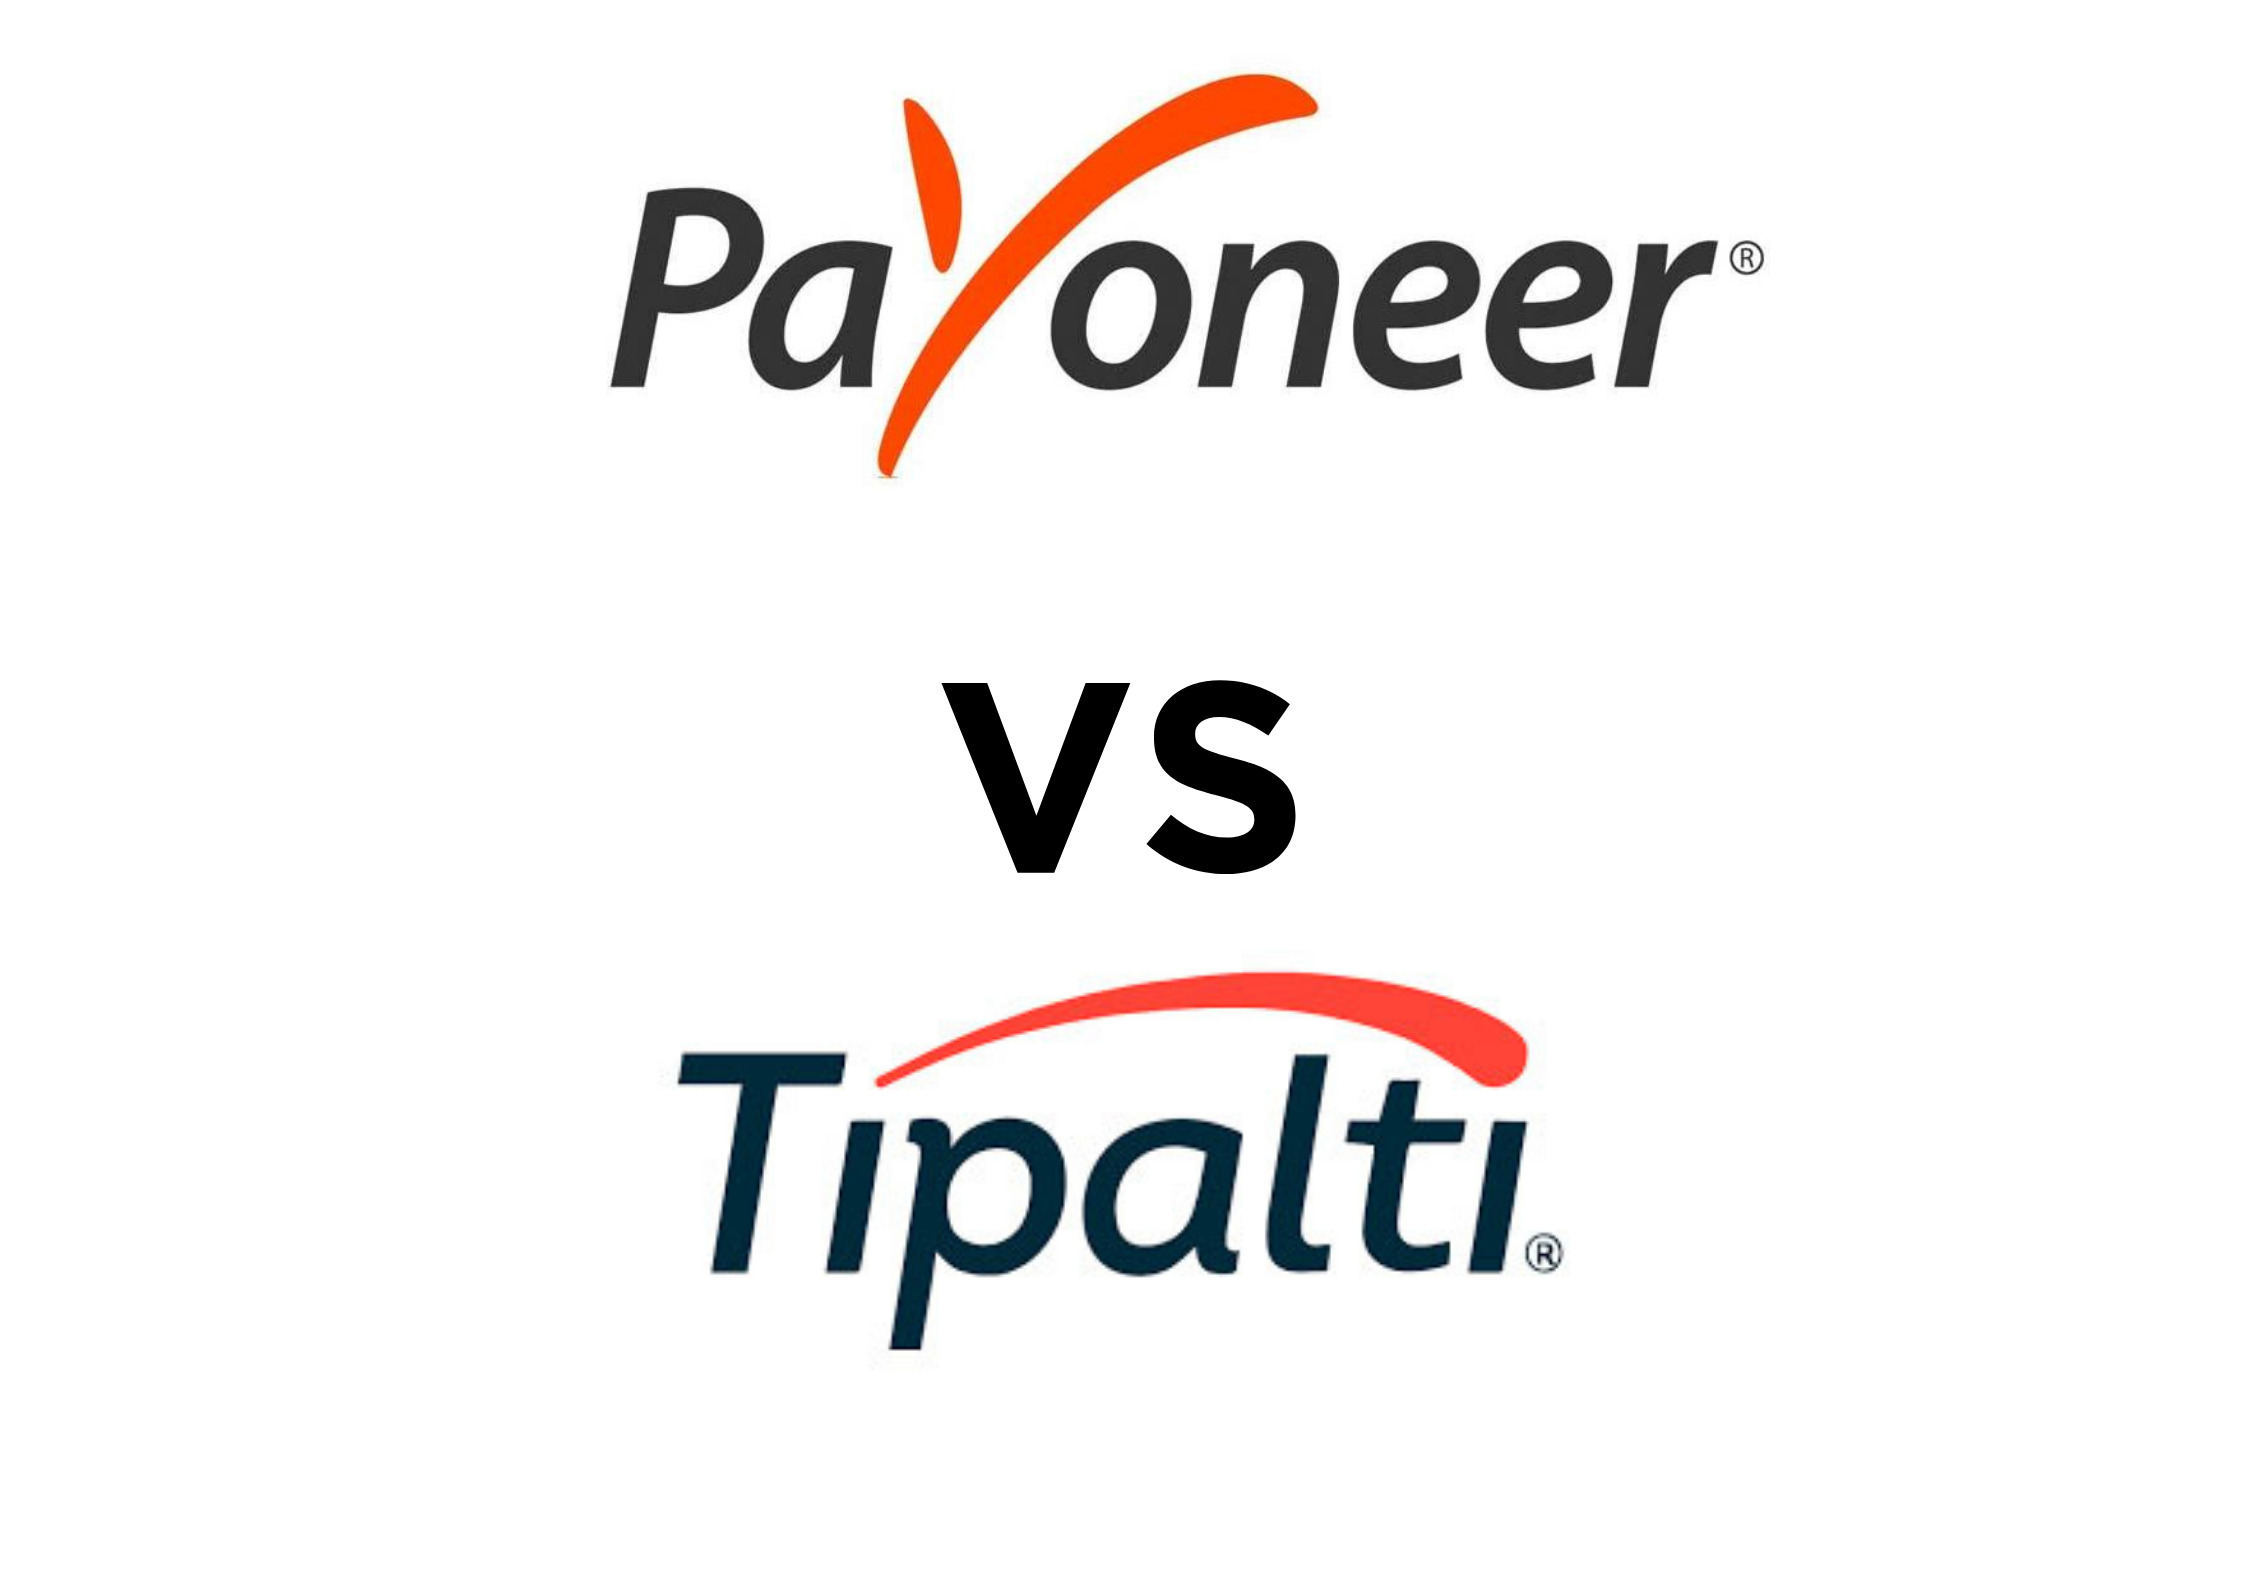 Payoneer vs. Tipalti: Which is better?